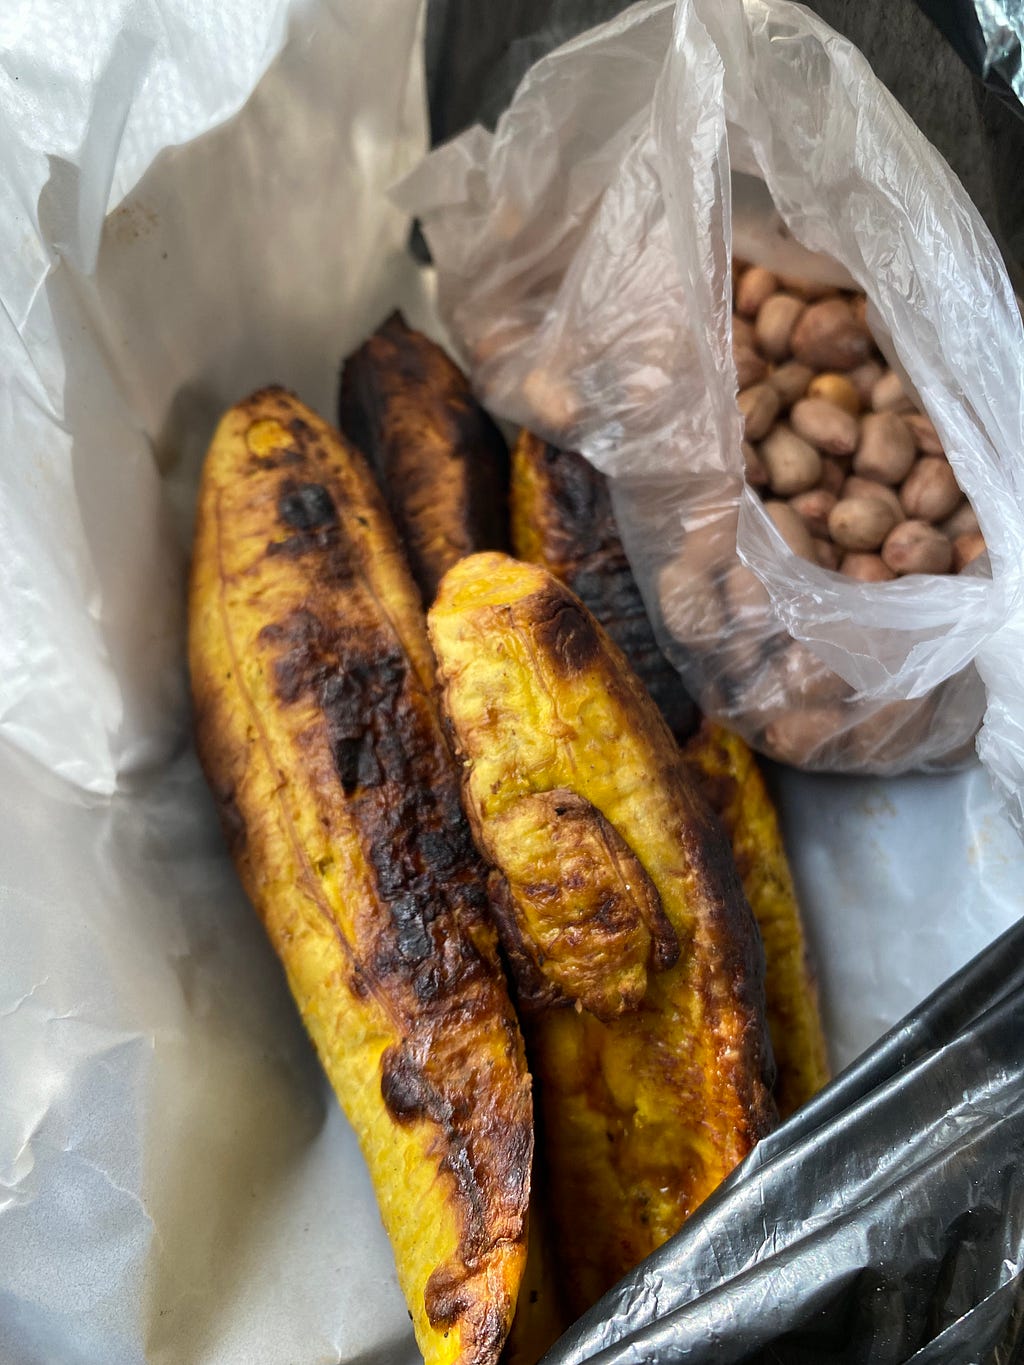 Grilled plantain and groundnuts, wrapped in paper. A street food delicacy.